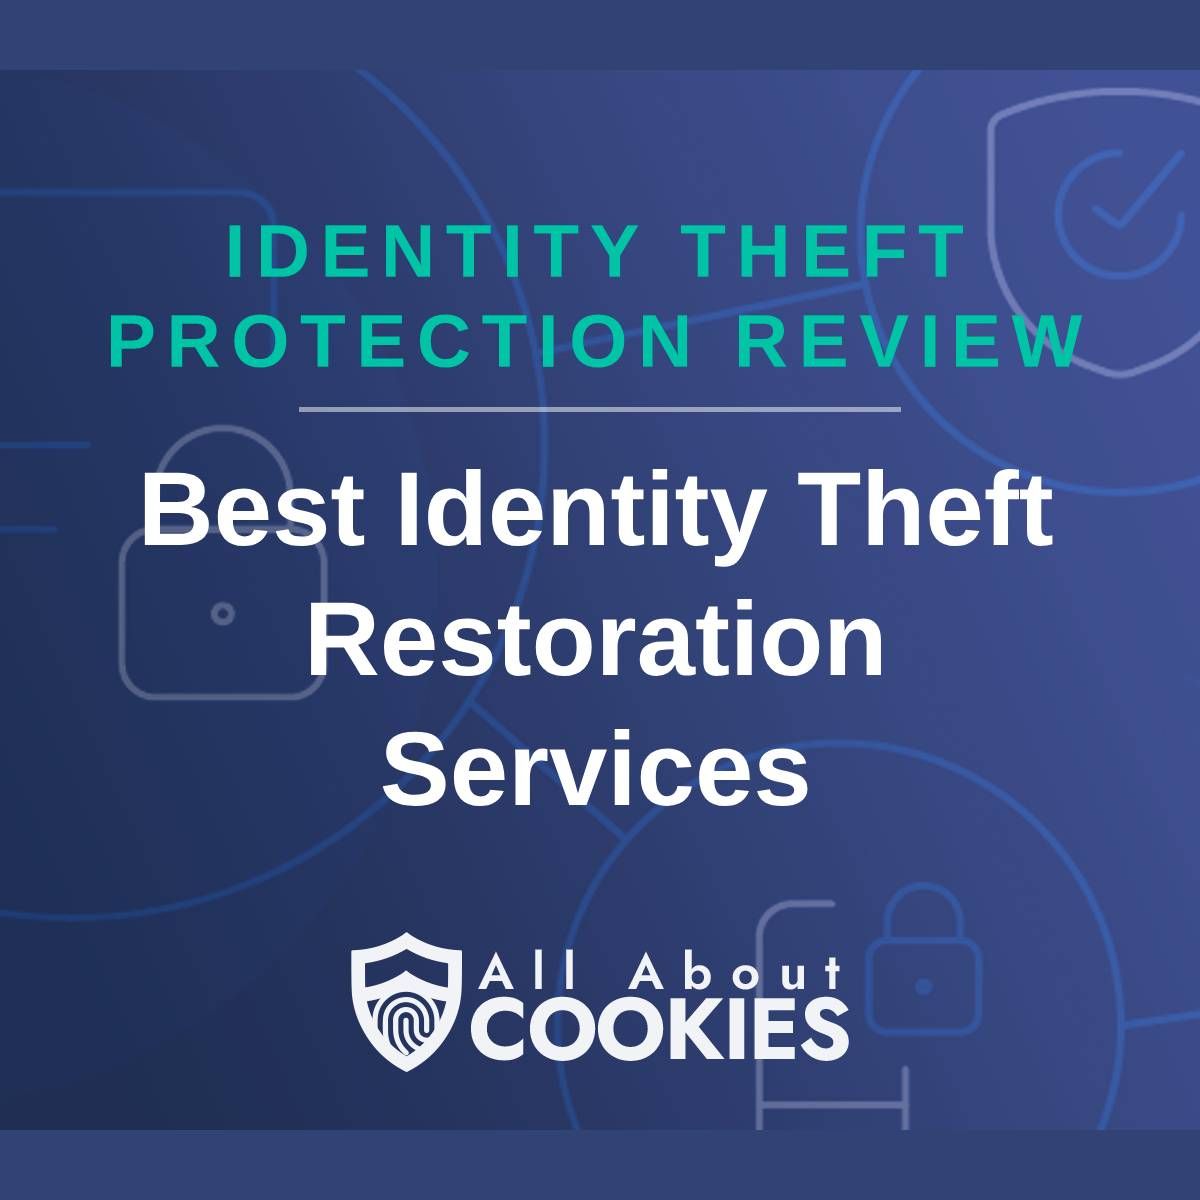 A blue background with images of locks and shields with the text &quot;Identity Theft Protection Review Best Identity Theft Restoration Services&quot; and the All About Cookies logo. 